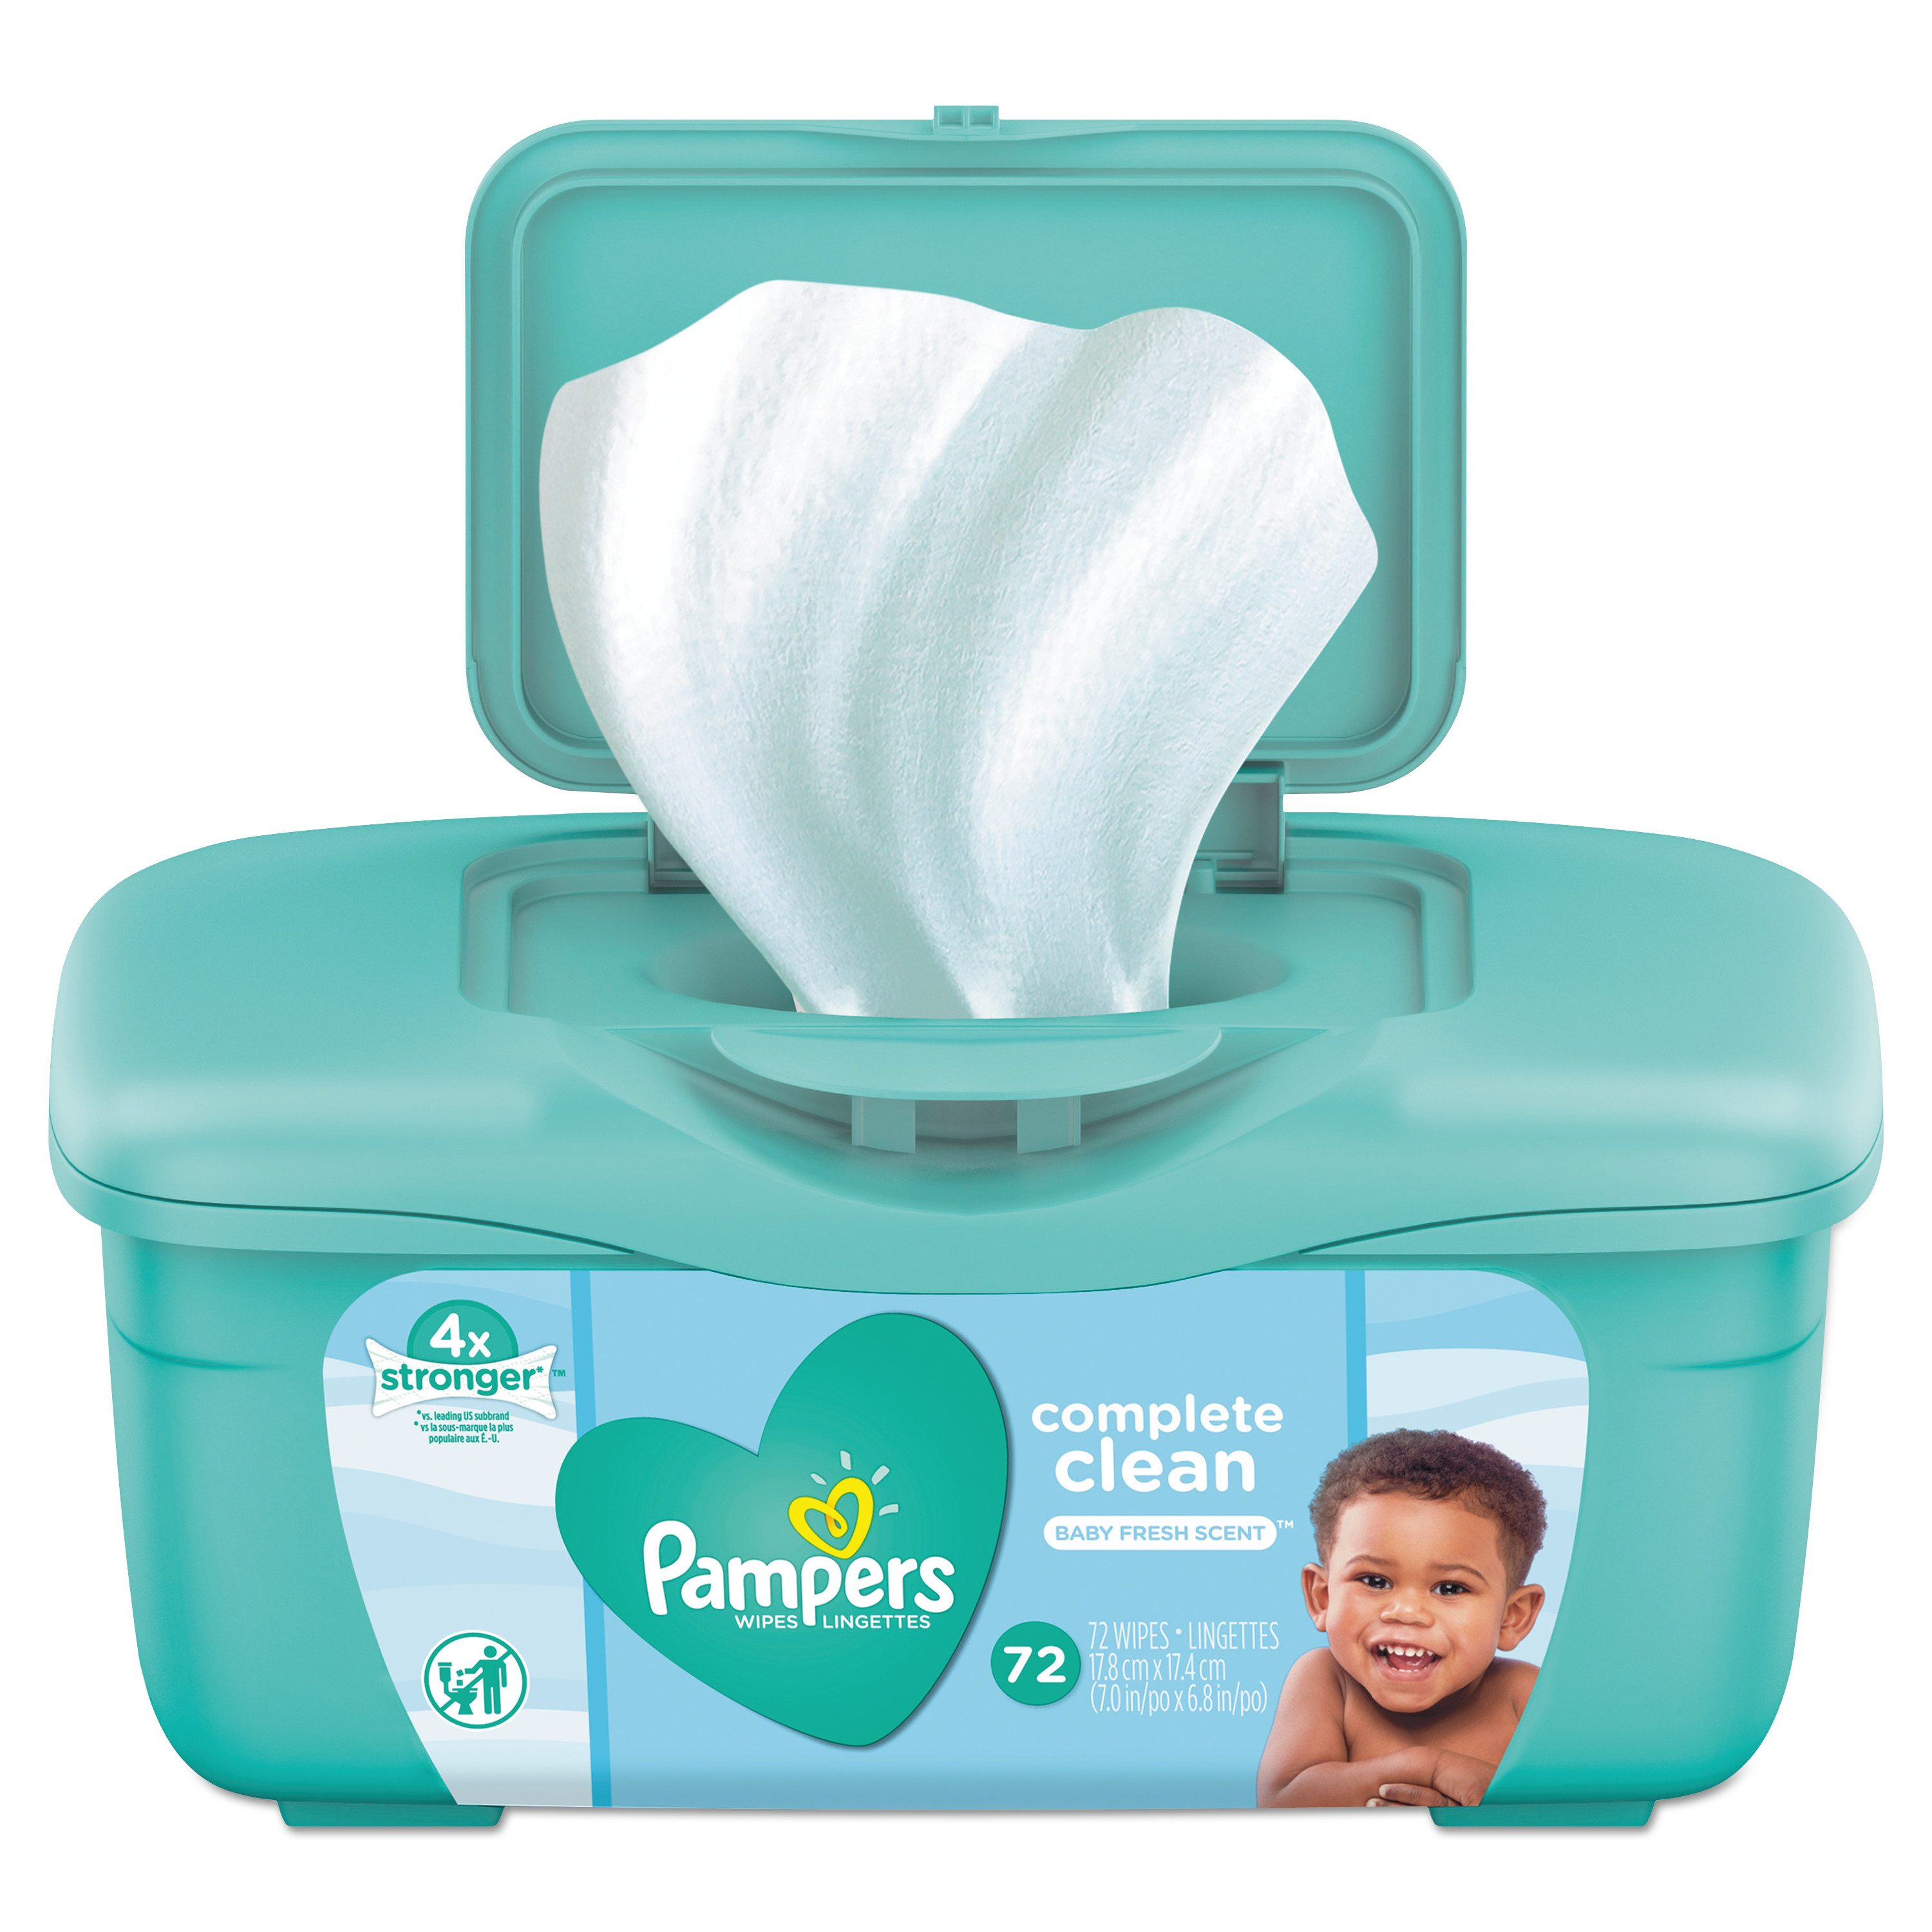  Pampers 75476 Complete Clean Baby Wipes, 1 Ply, Baby Fresh, 72 Wipes/Tub, 8 Tubs/Carton (PGC75476) 